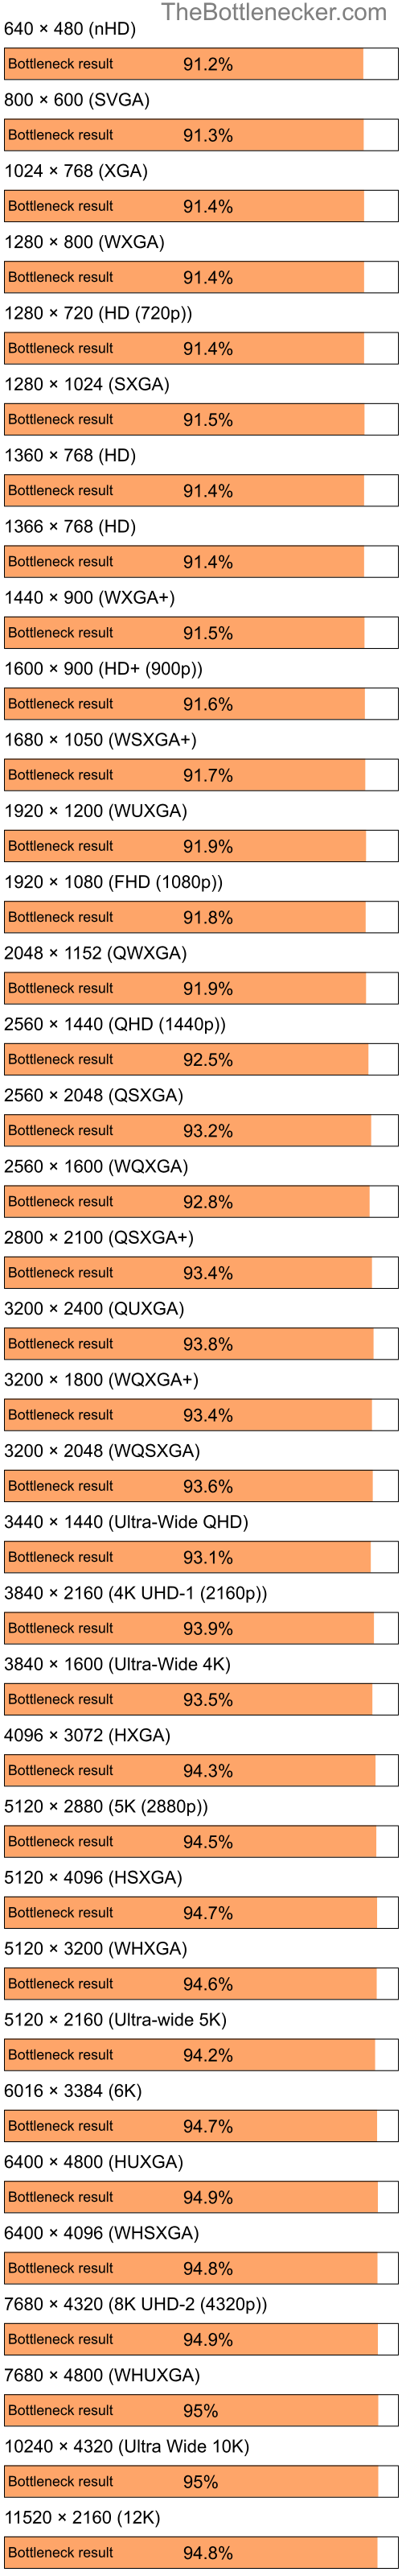 Bottleneck results by resolution for Intel Pentium 4 and NVIDIA GeForce2 MX 100 in General Tasks